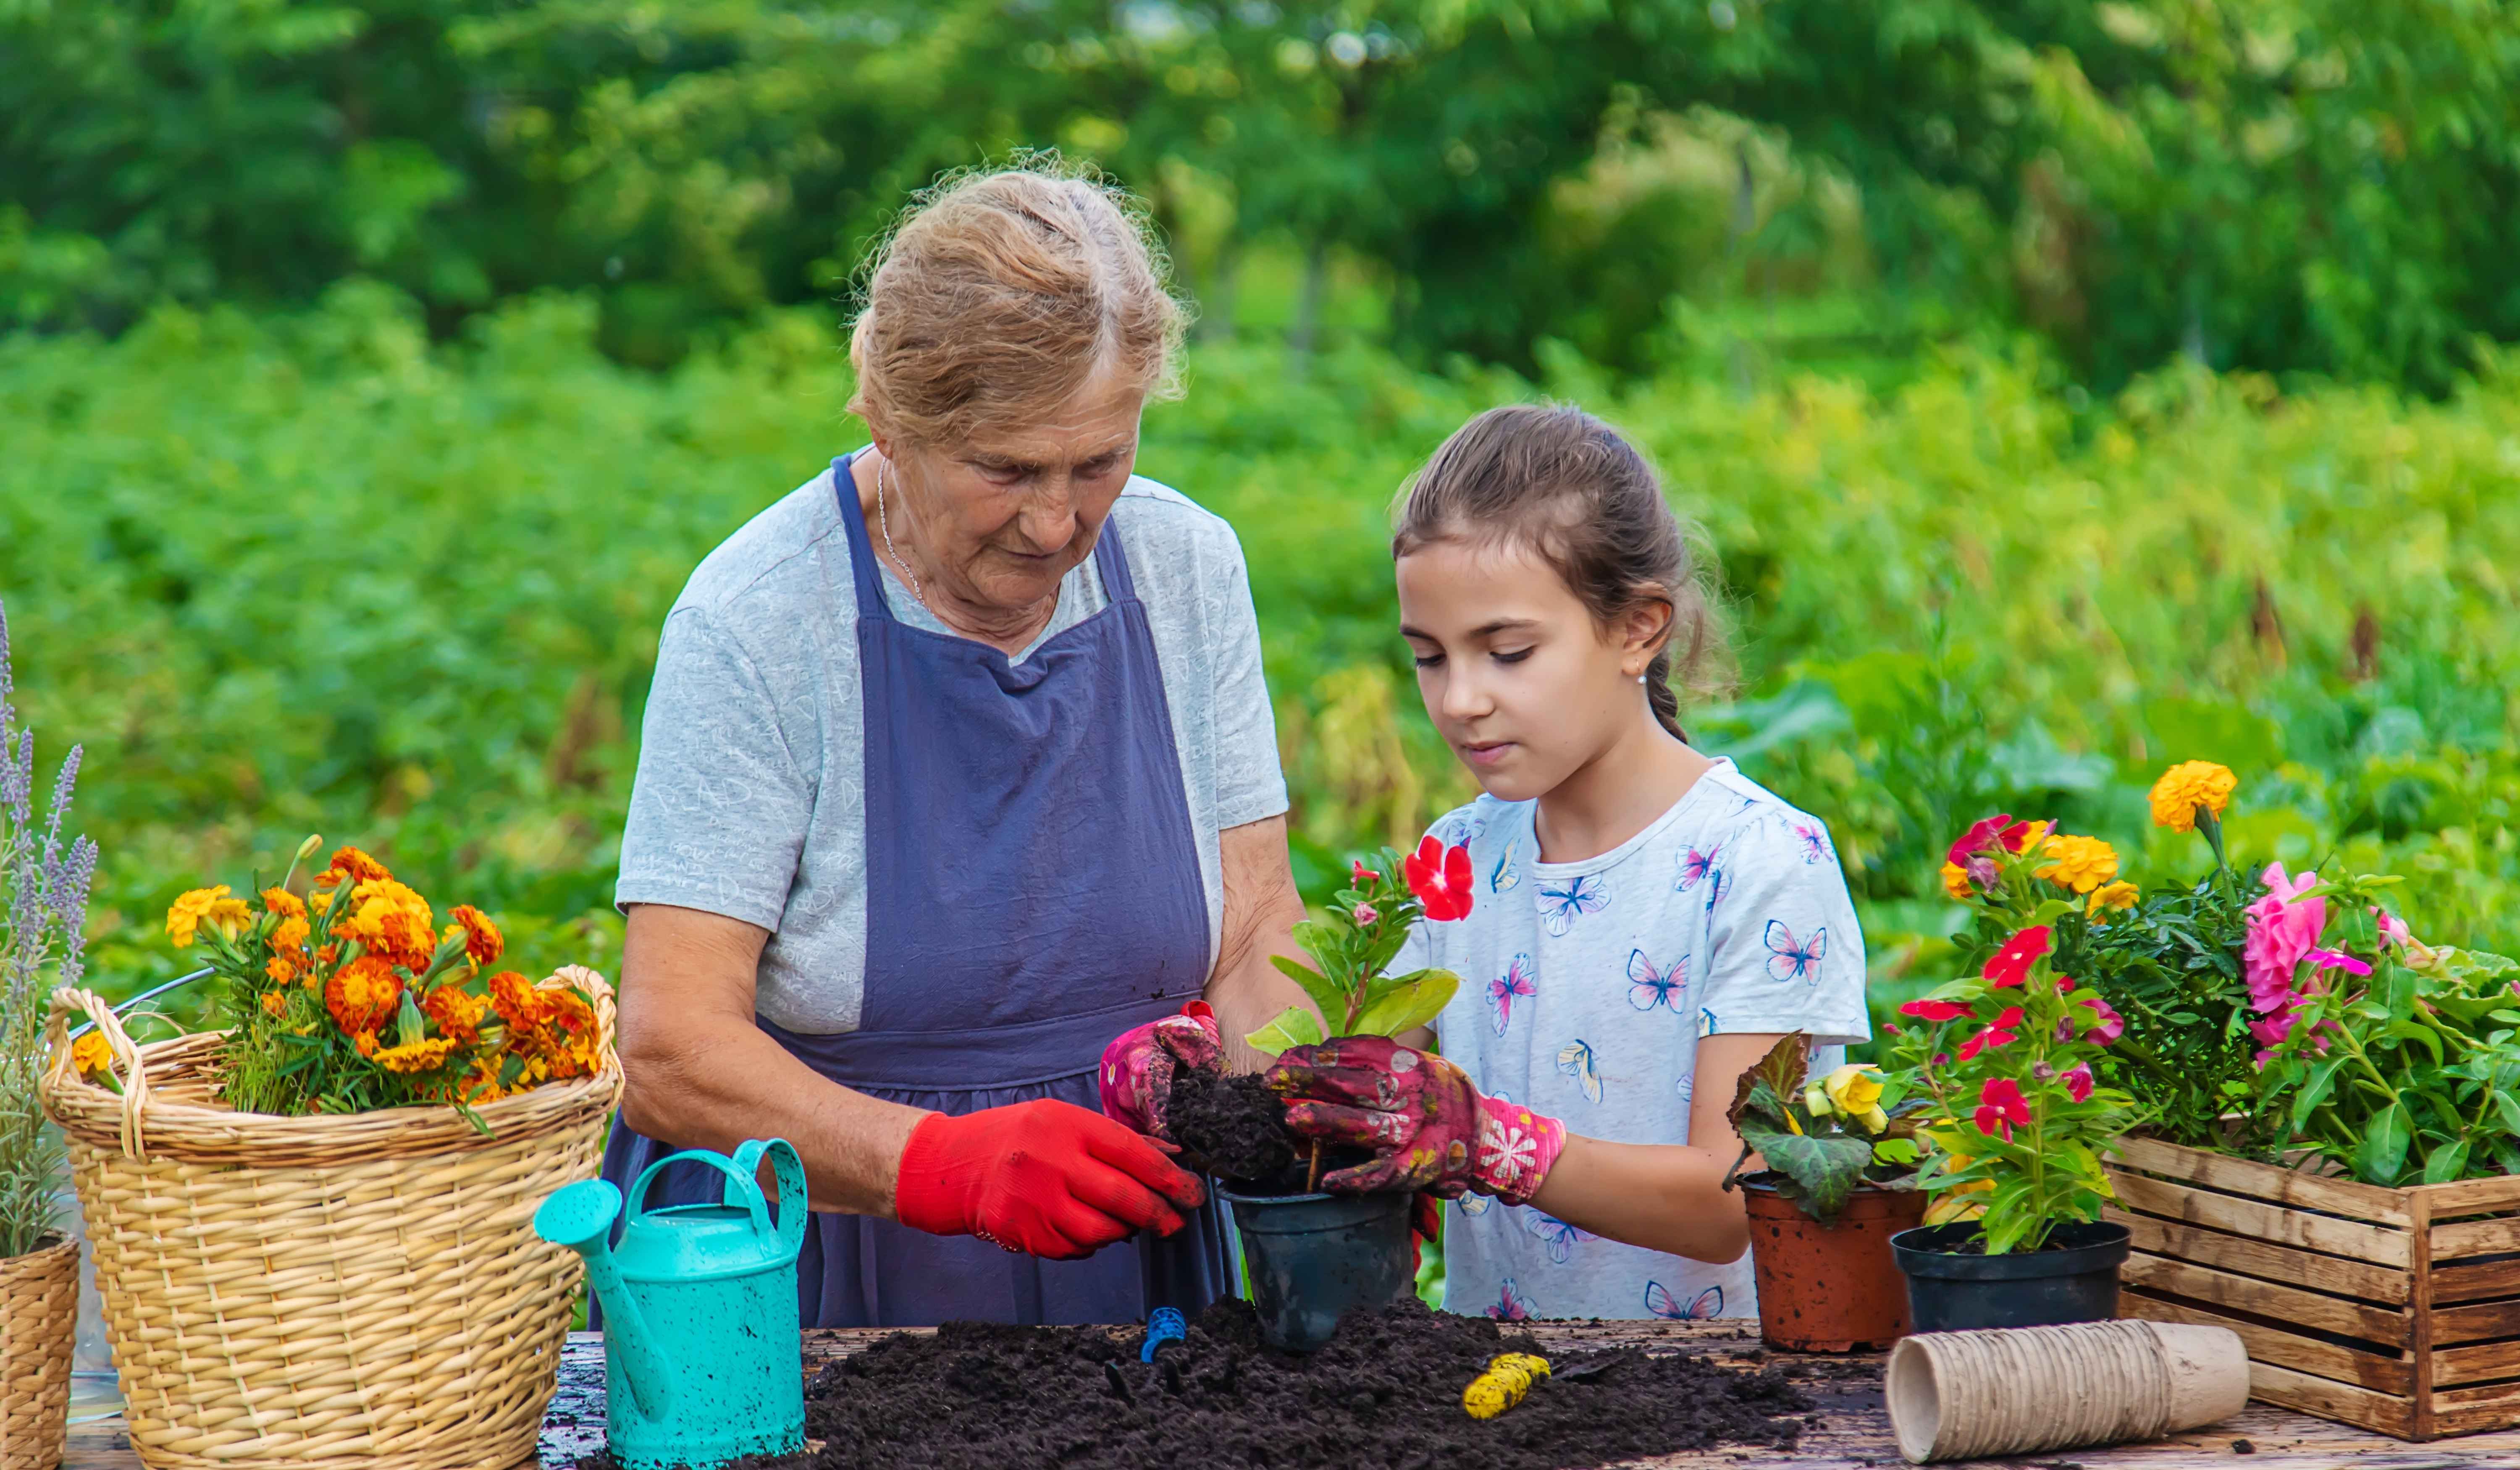 A grandma and her granddaughter plant flowers together before the end of summer